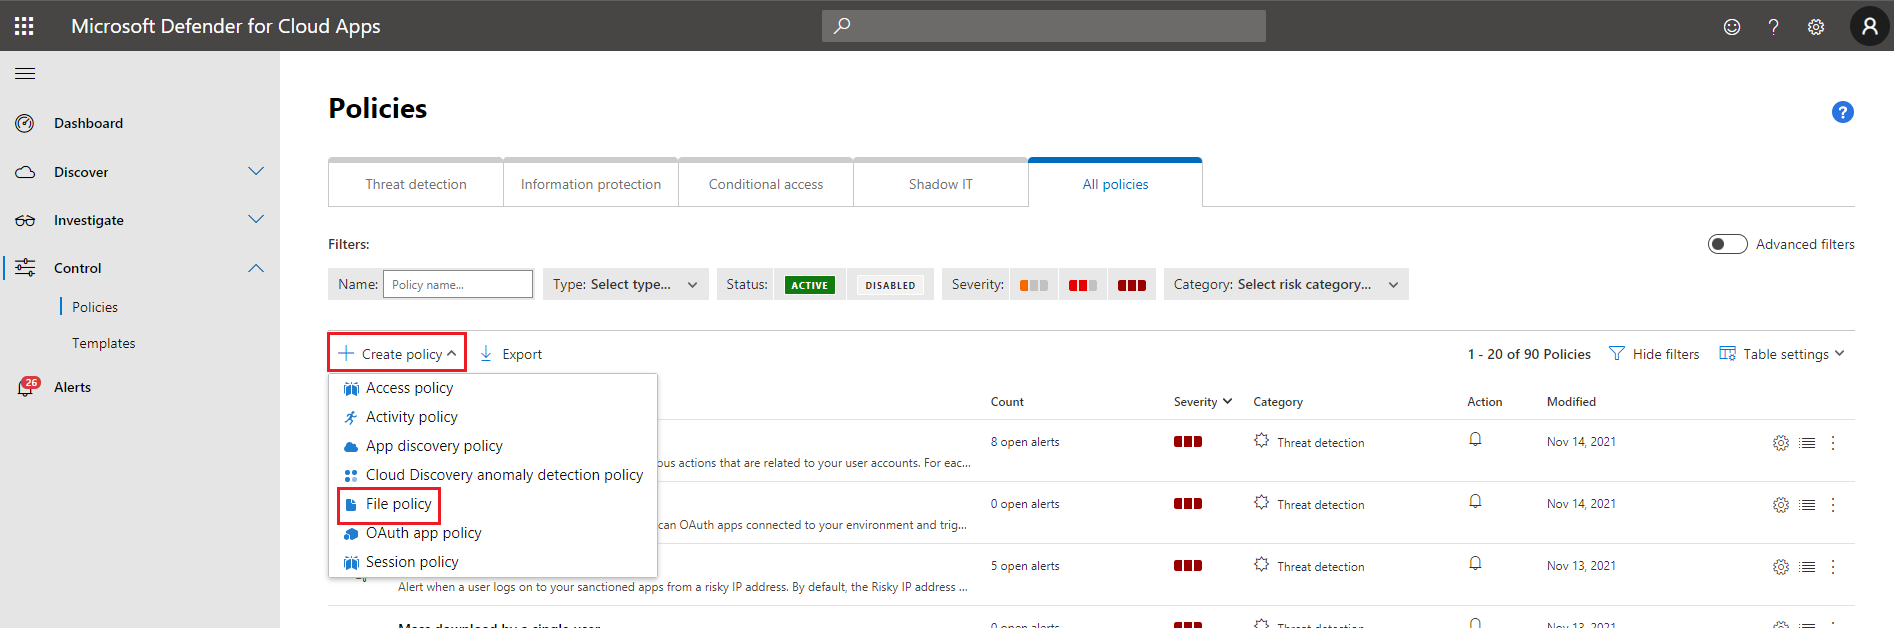 A screenshot of the Microsoft Defender for Cloud Apps portal showing how to create a file policy.